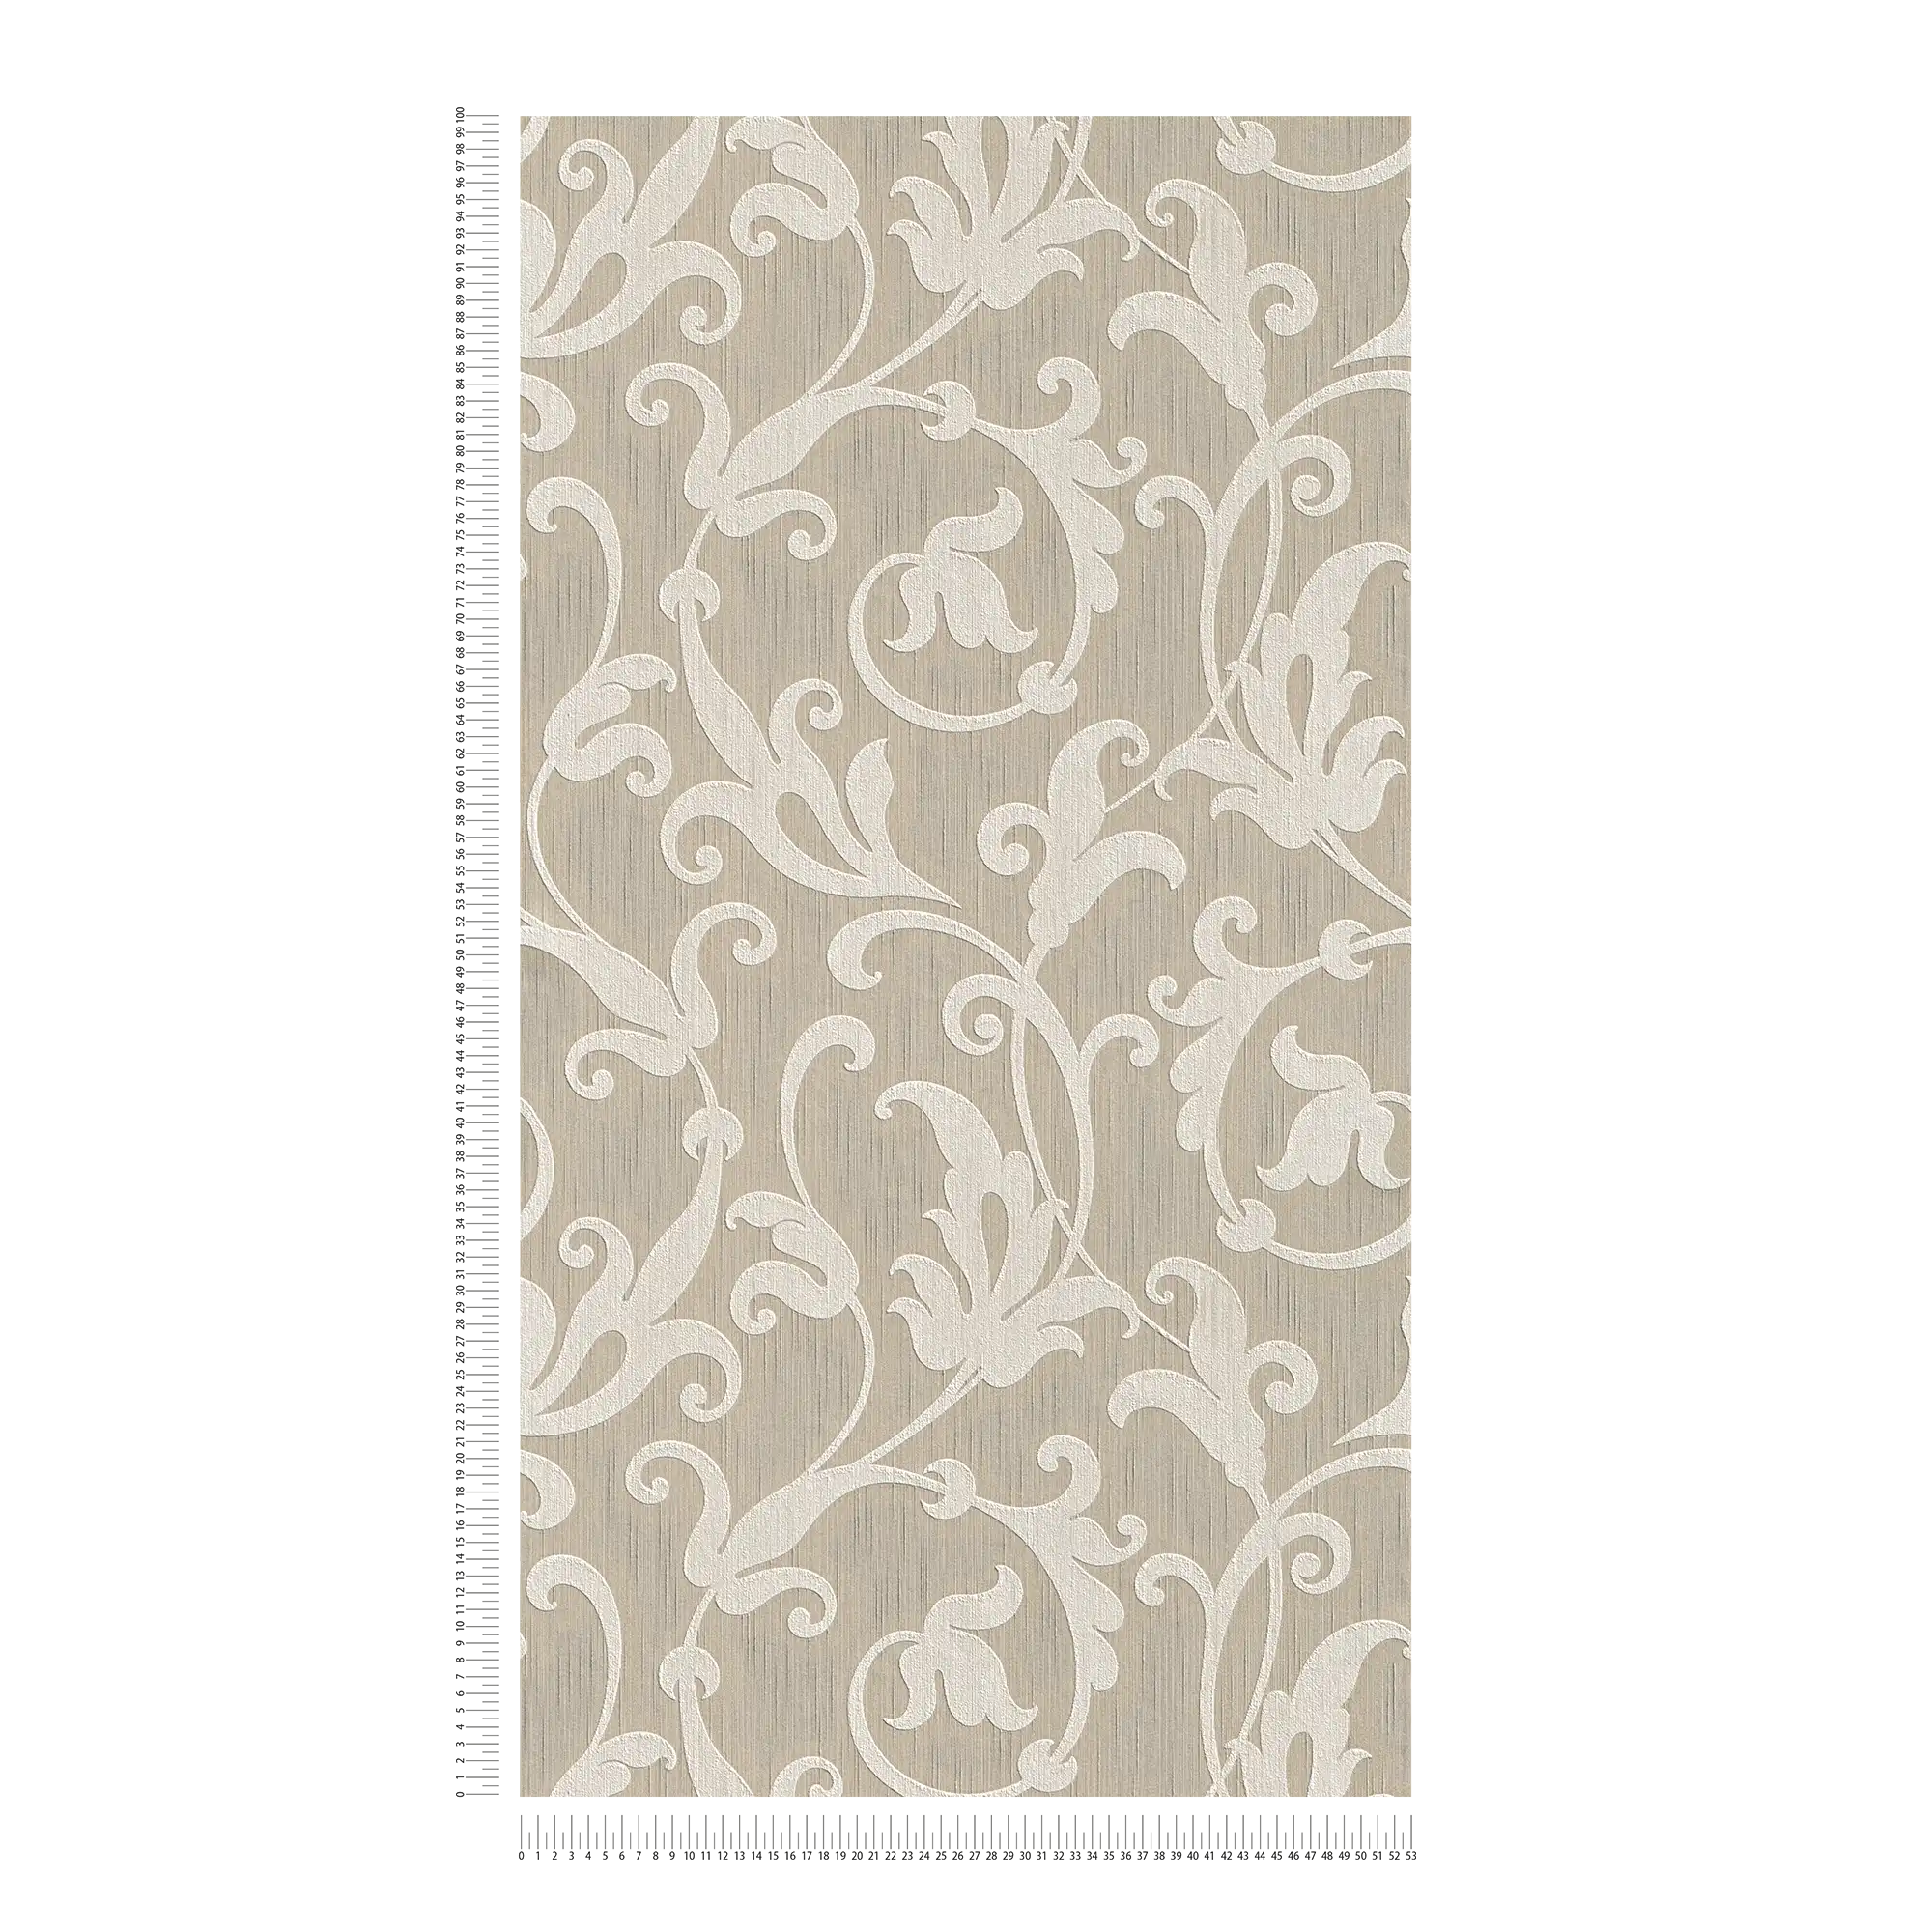             Textile wallpaper embossed with ornaments - beige, silver
        